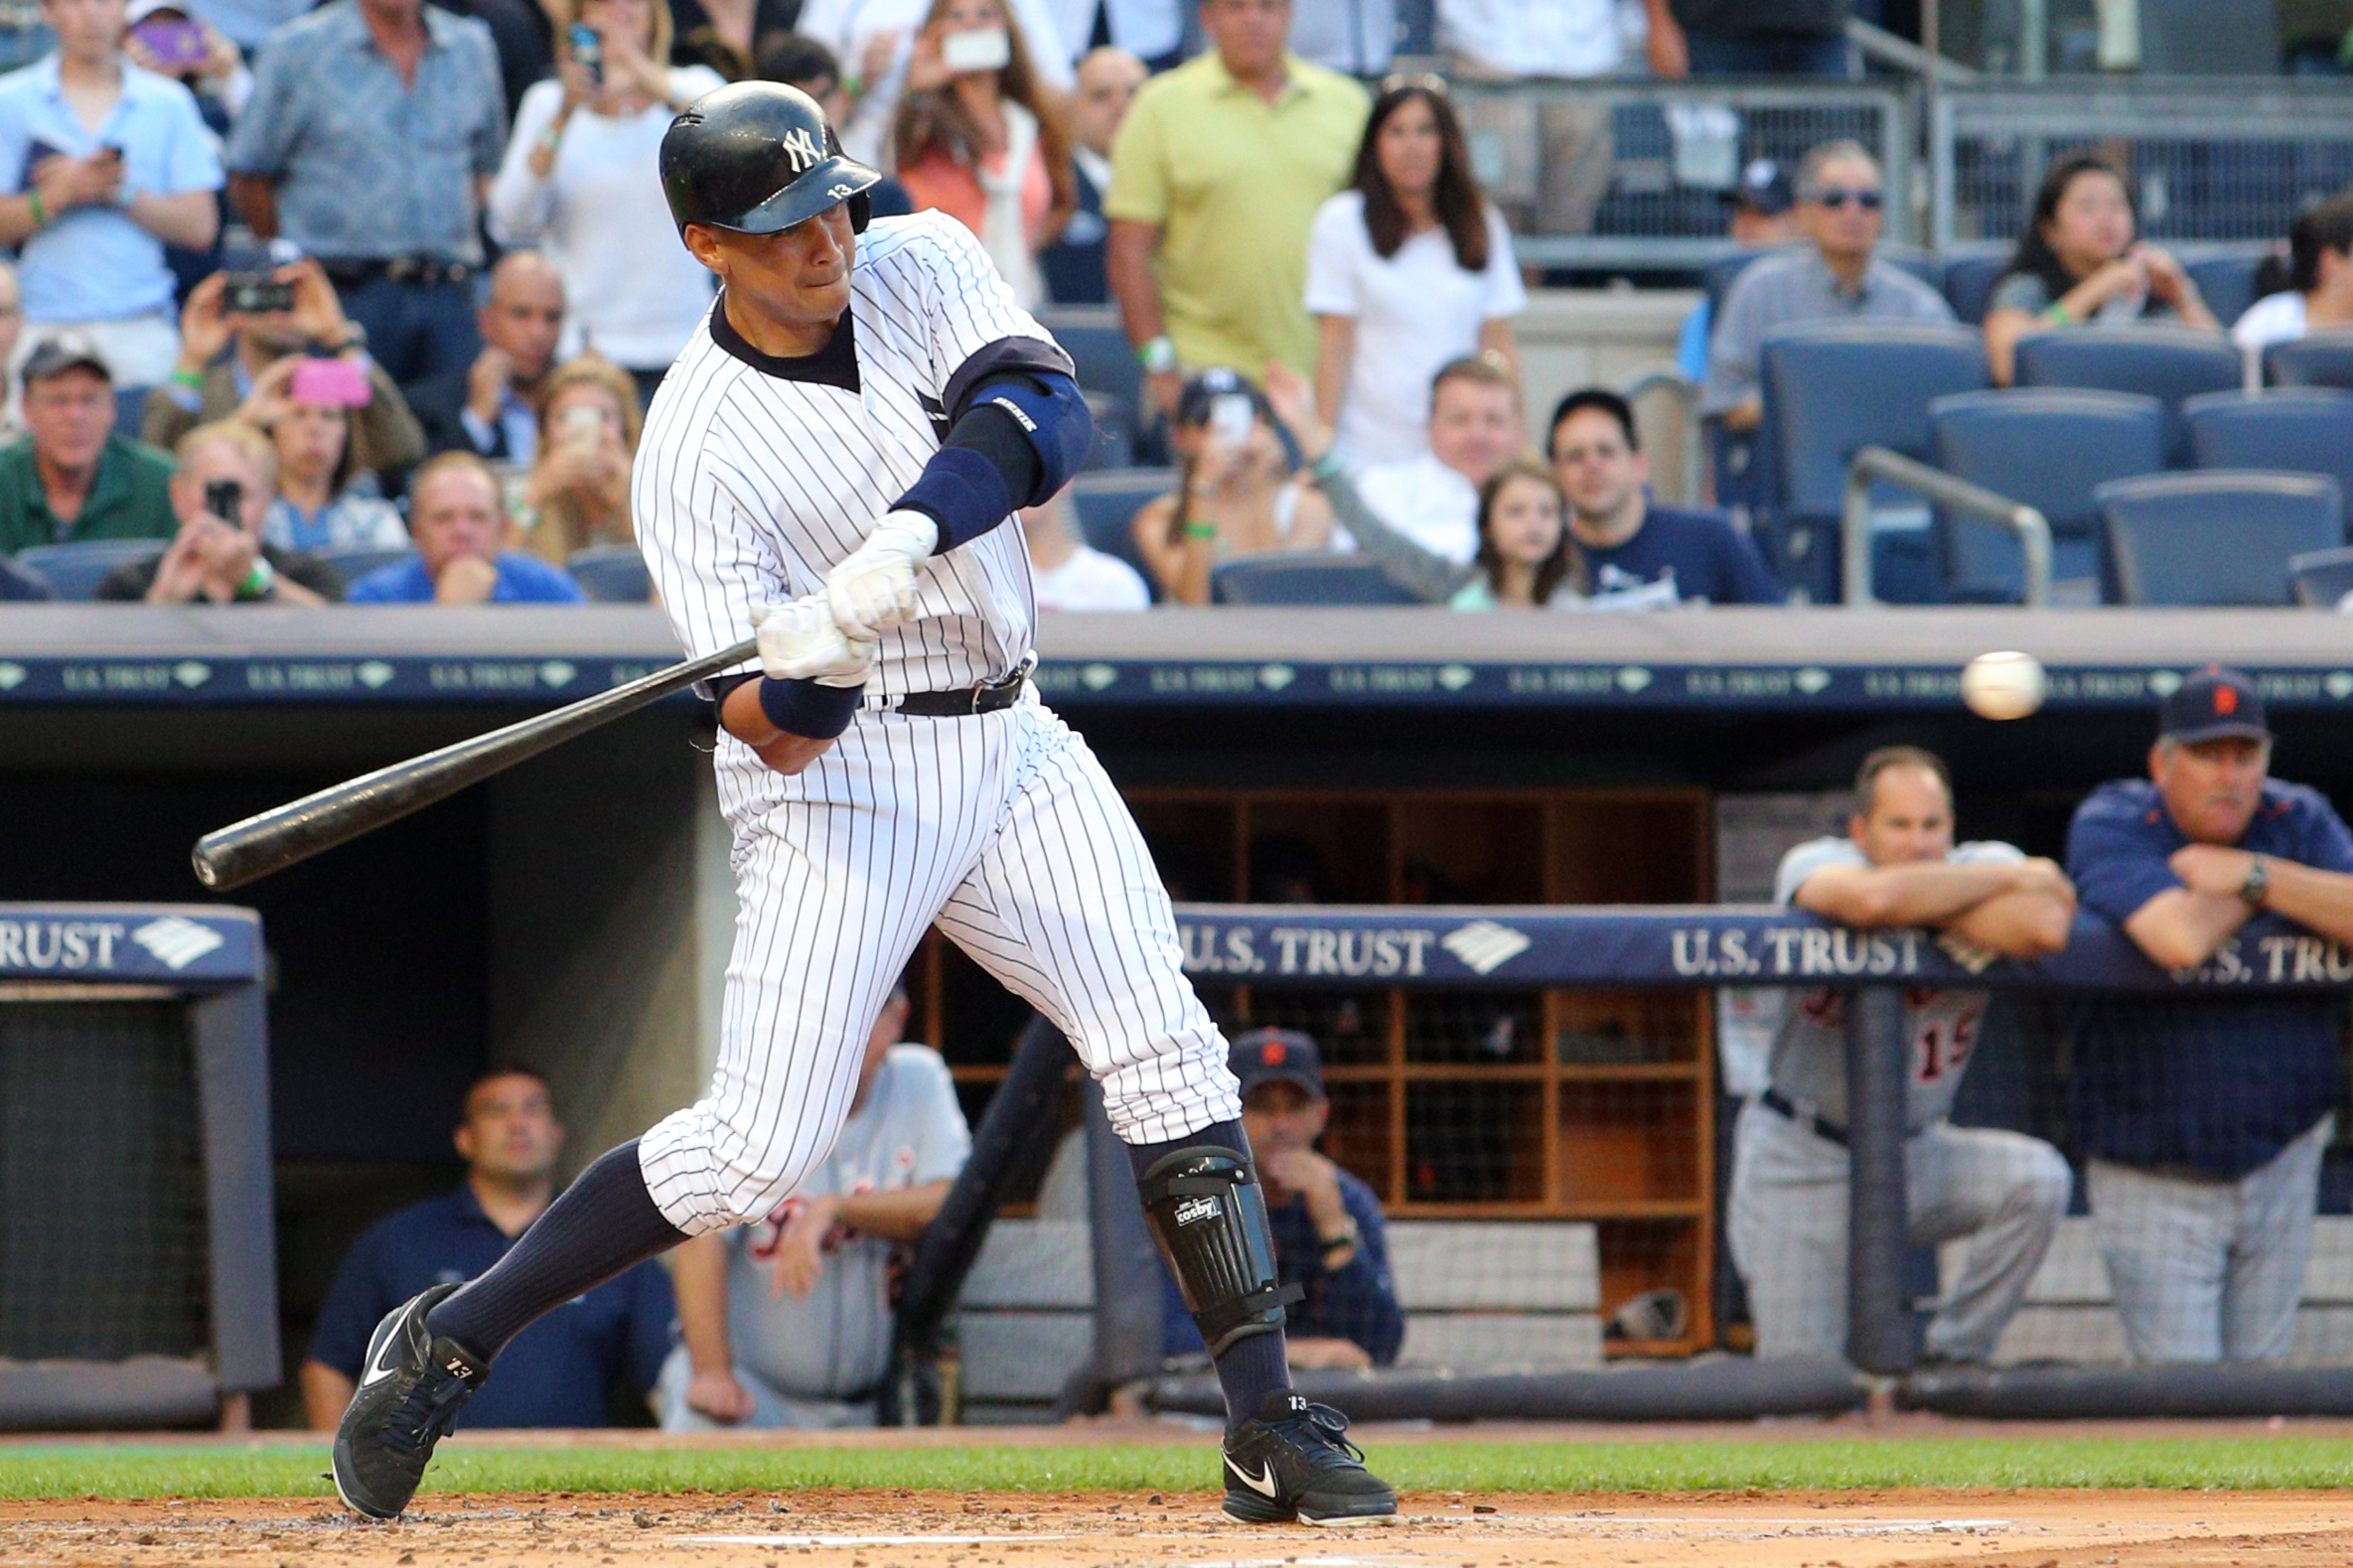 Will Alex Rodriguez Be Written Out of MLB History?